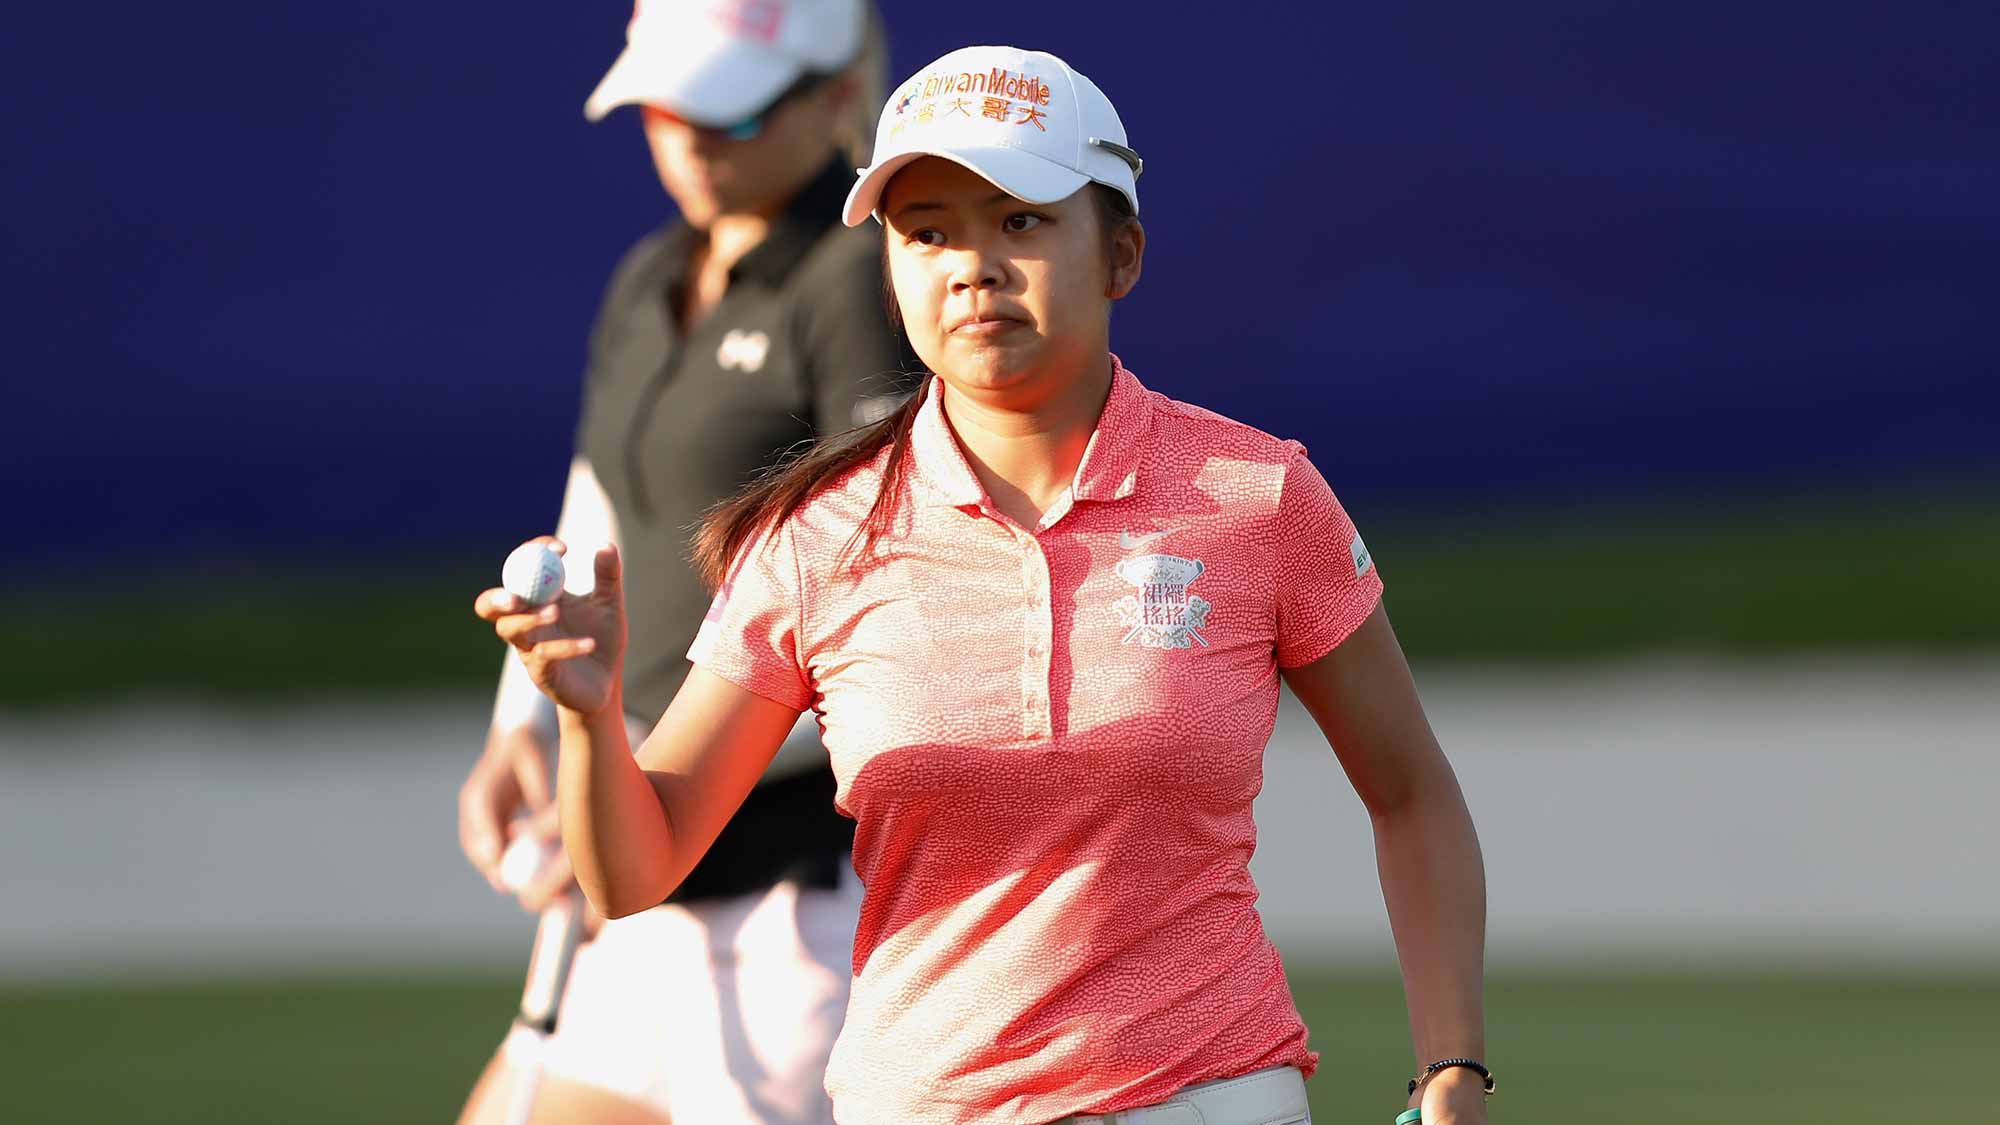 Wei-Ling Hsu acknowledges to spectators at the eighteenth hole during the third round of the Swinging Skirts LPGA Taiwan Championship at Ta Shee Golf & Country Club on October 27, 2018 in Taoyuan, Chinese Taipei